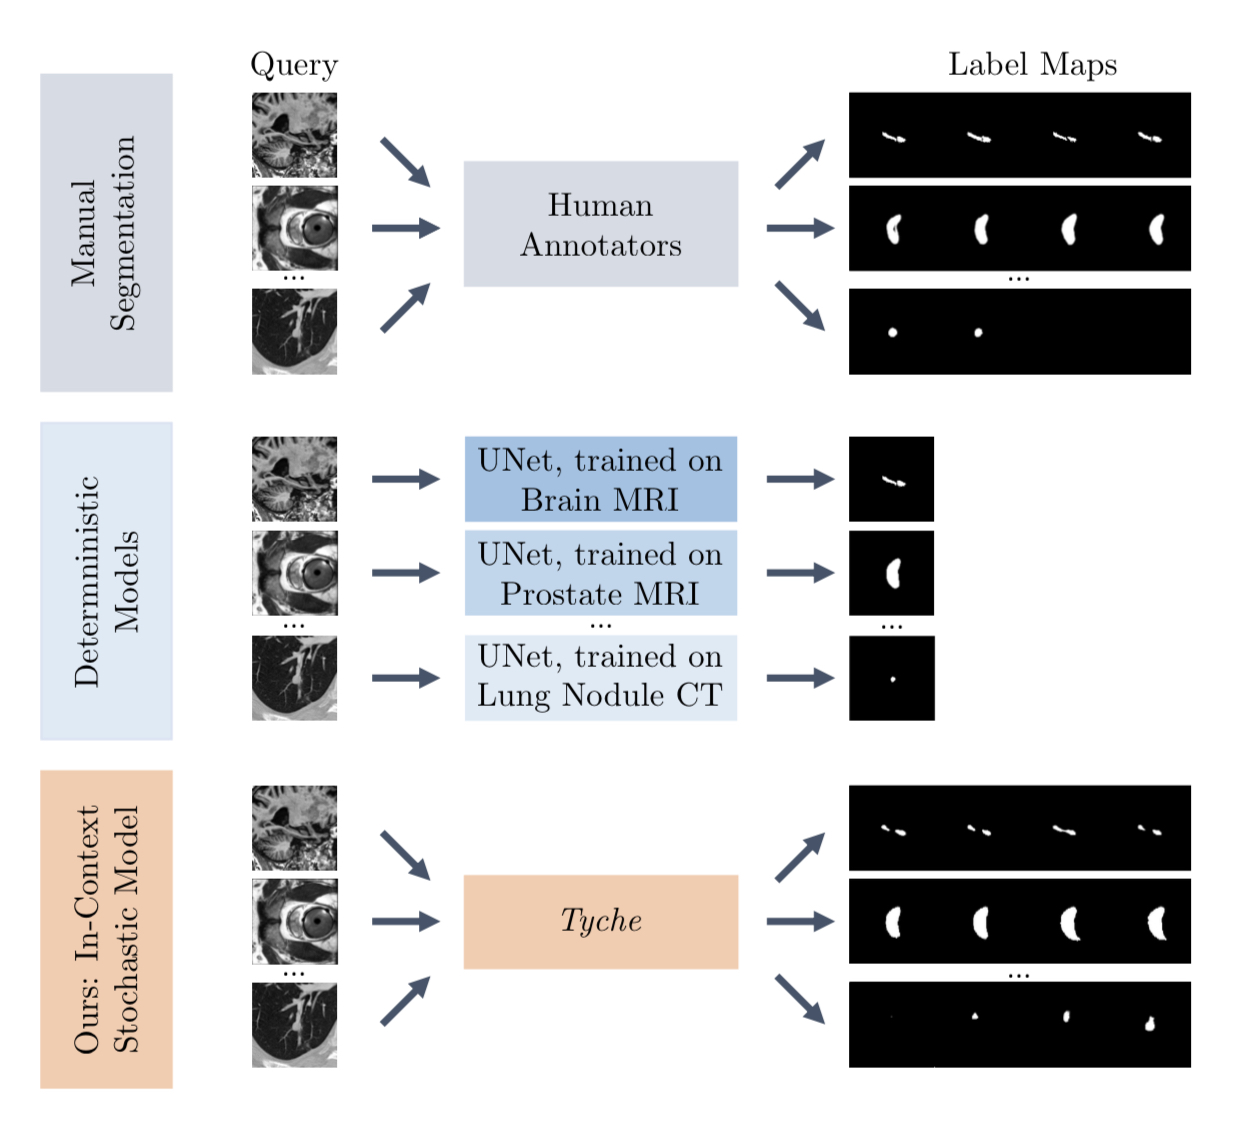 Scientists have created an AI model for analyzing medical images